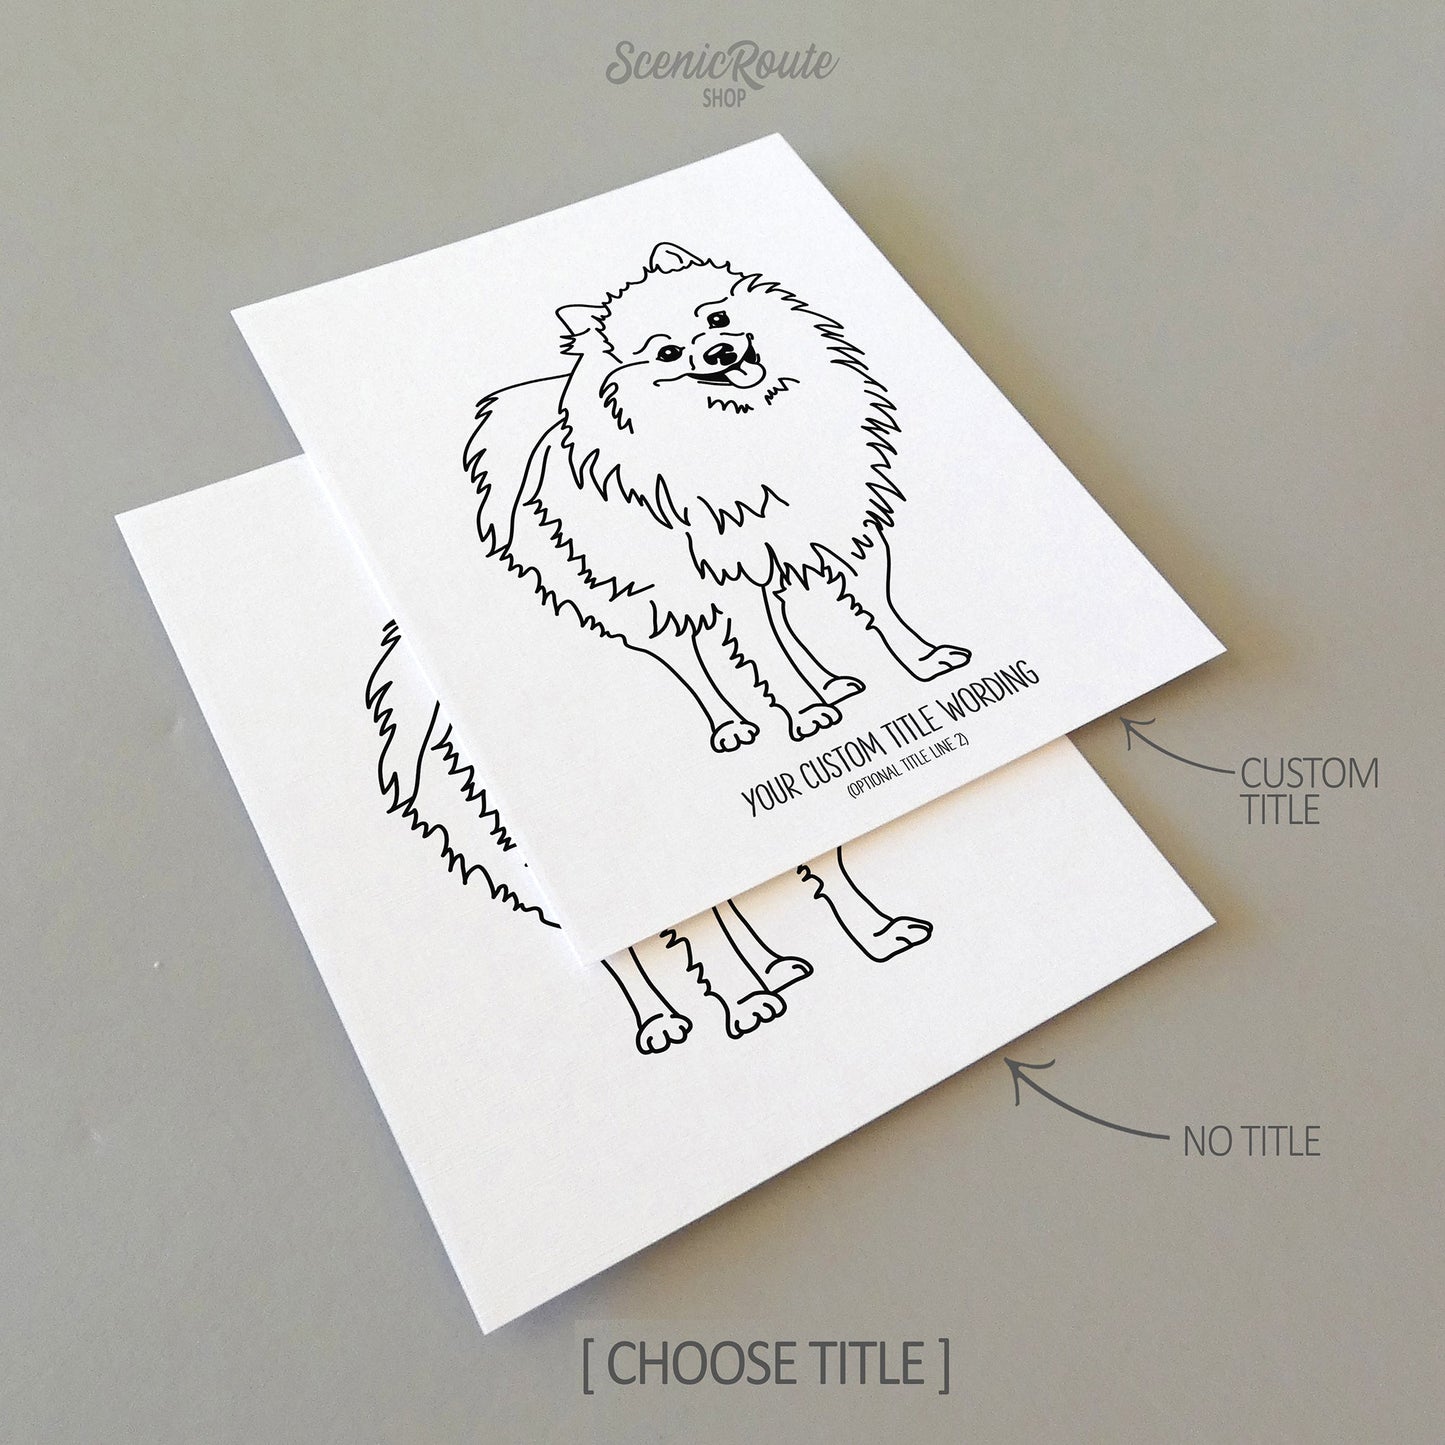 Two line art drawings of a Pomeranian dog on white linen paper with a gray background.  The pieces are shown with “No Title” and “Custom Title” options for the available art print options.